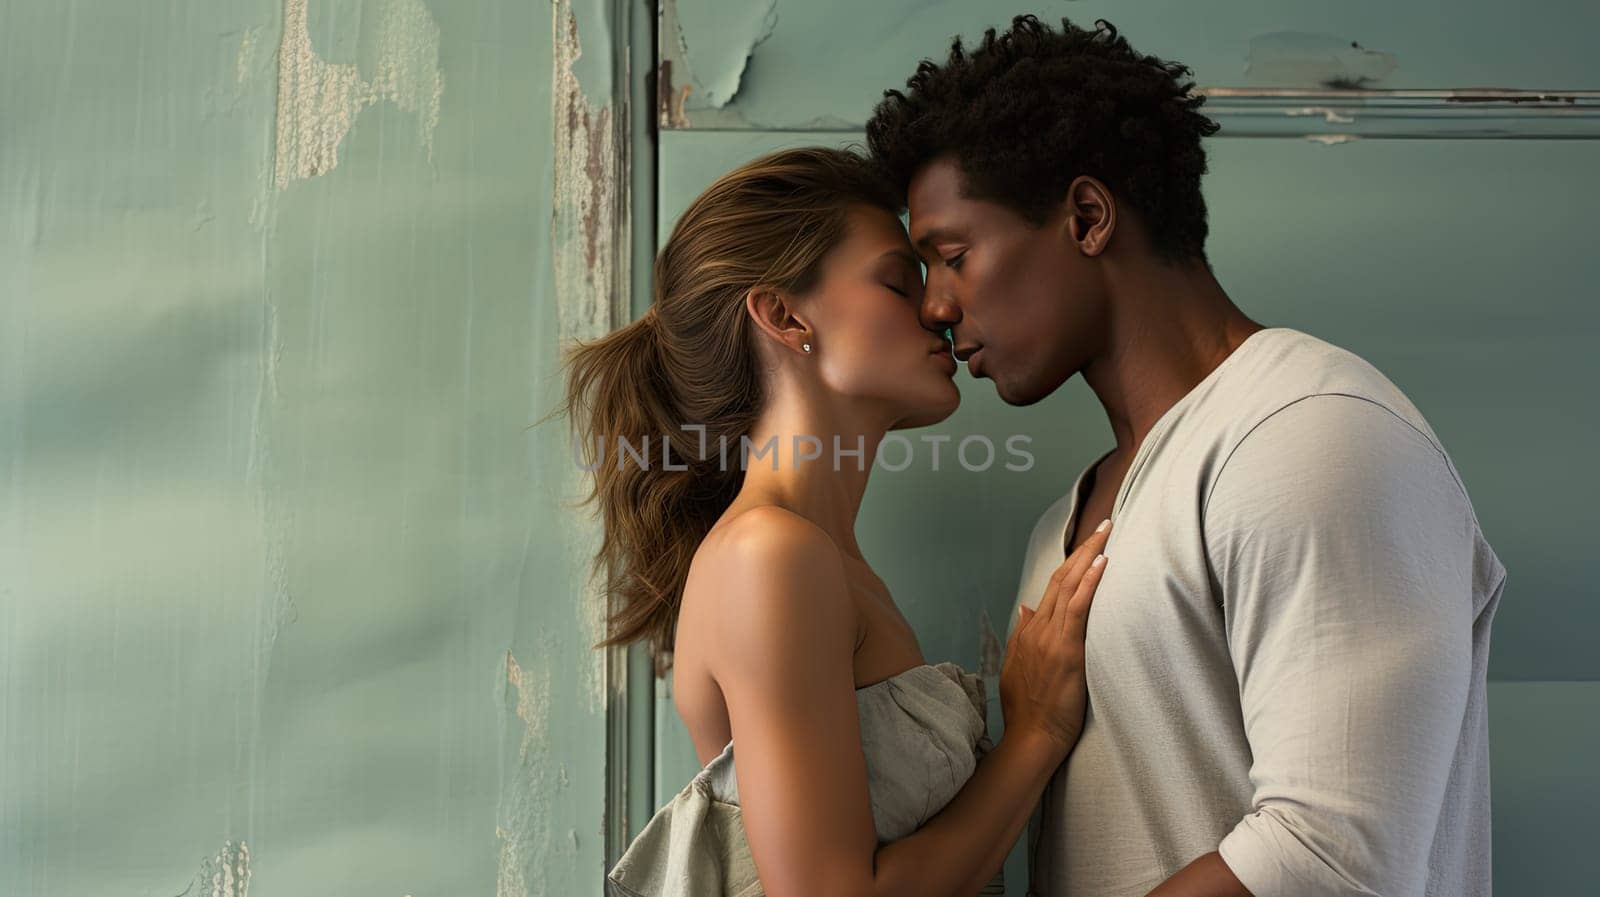 Interracial boyfriend and girlfriend kissing with copy space.